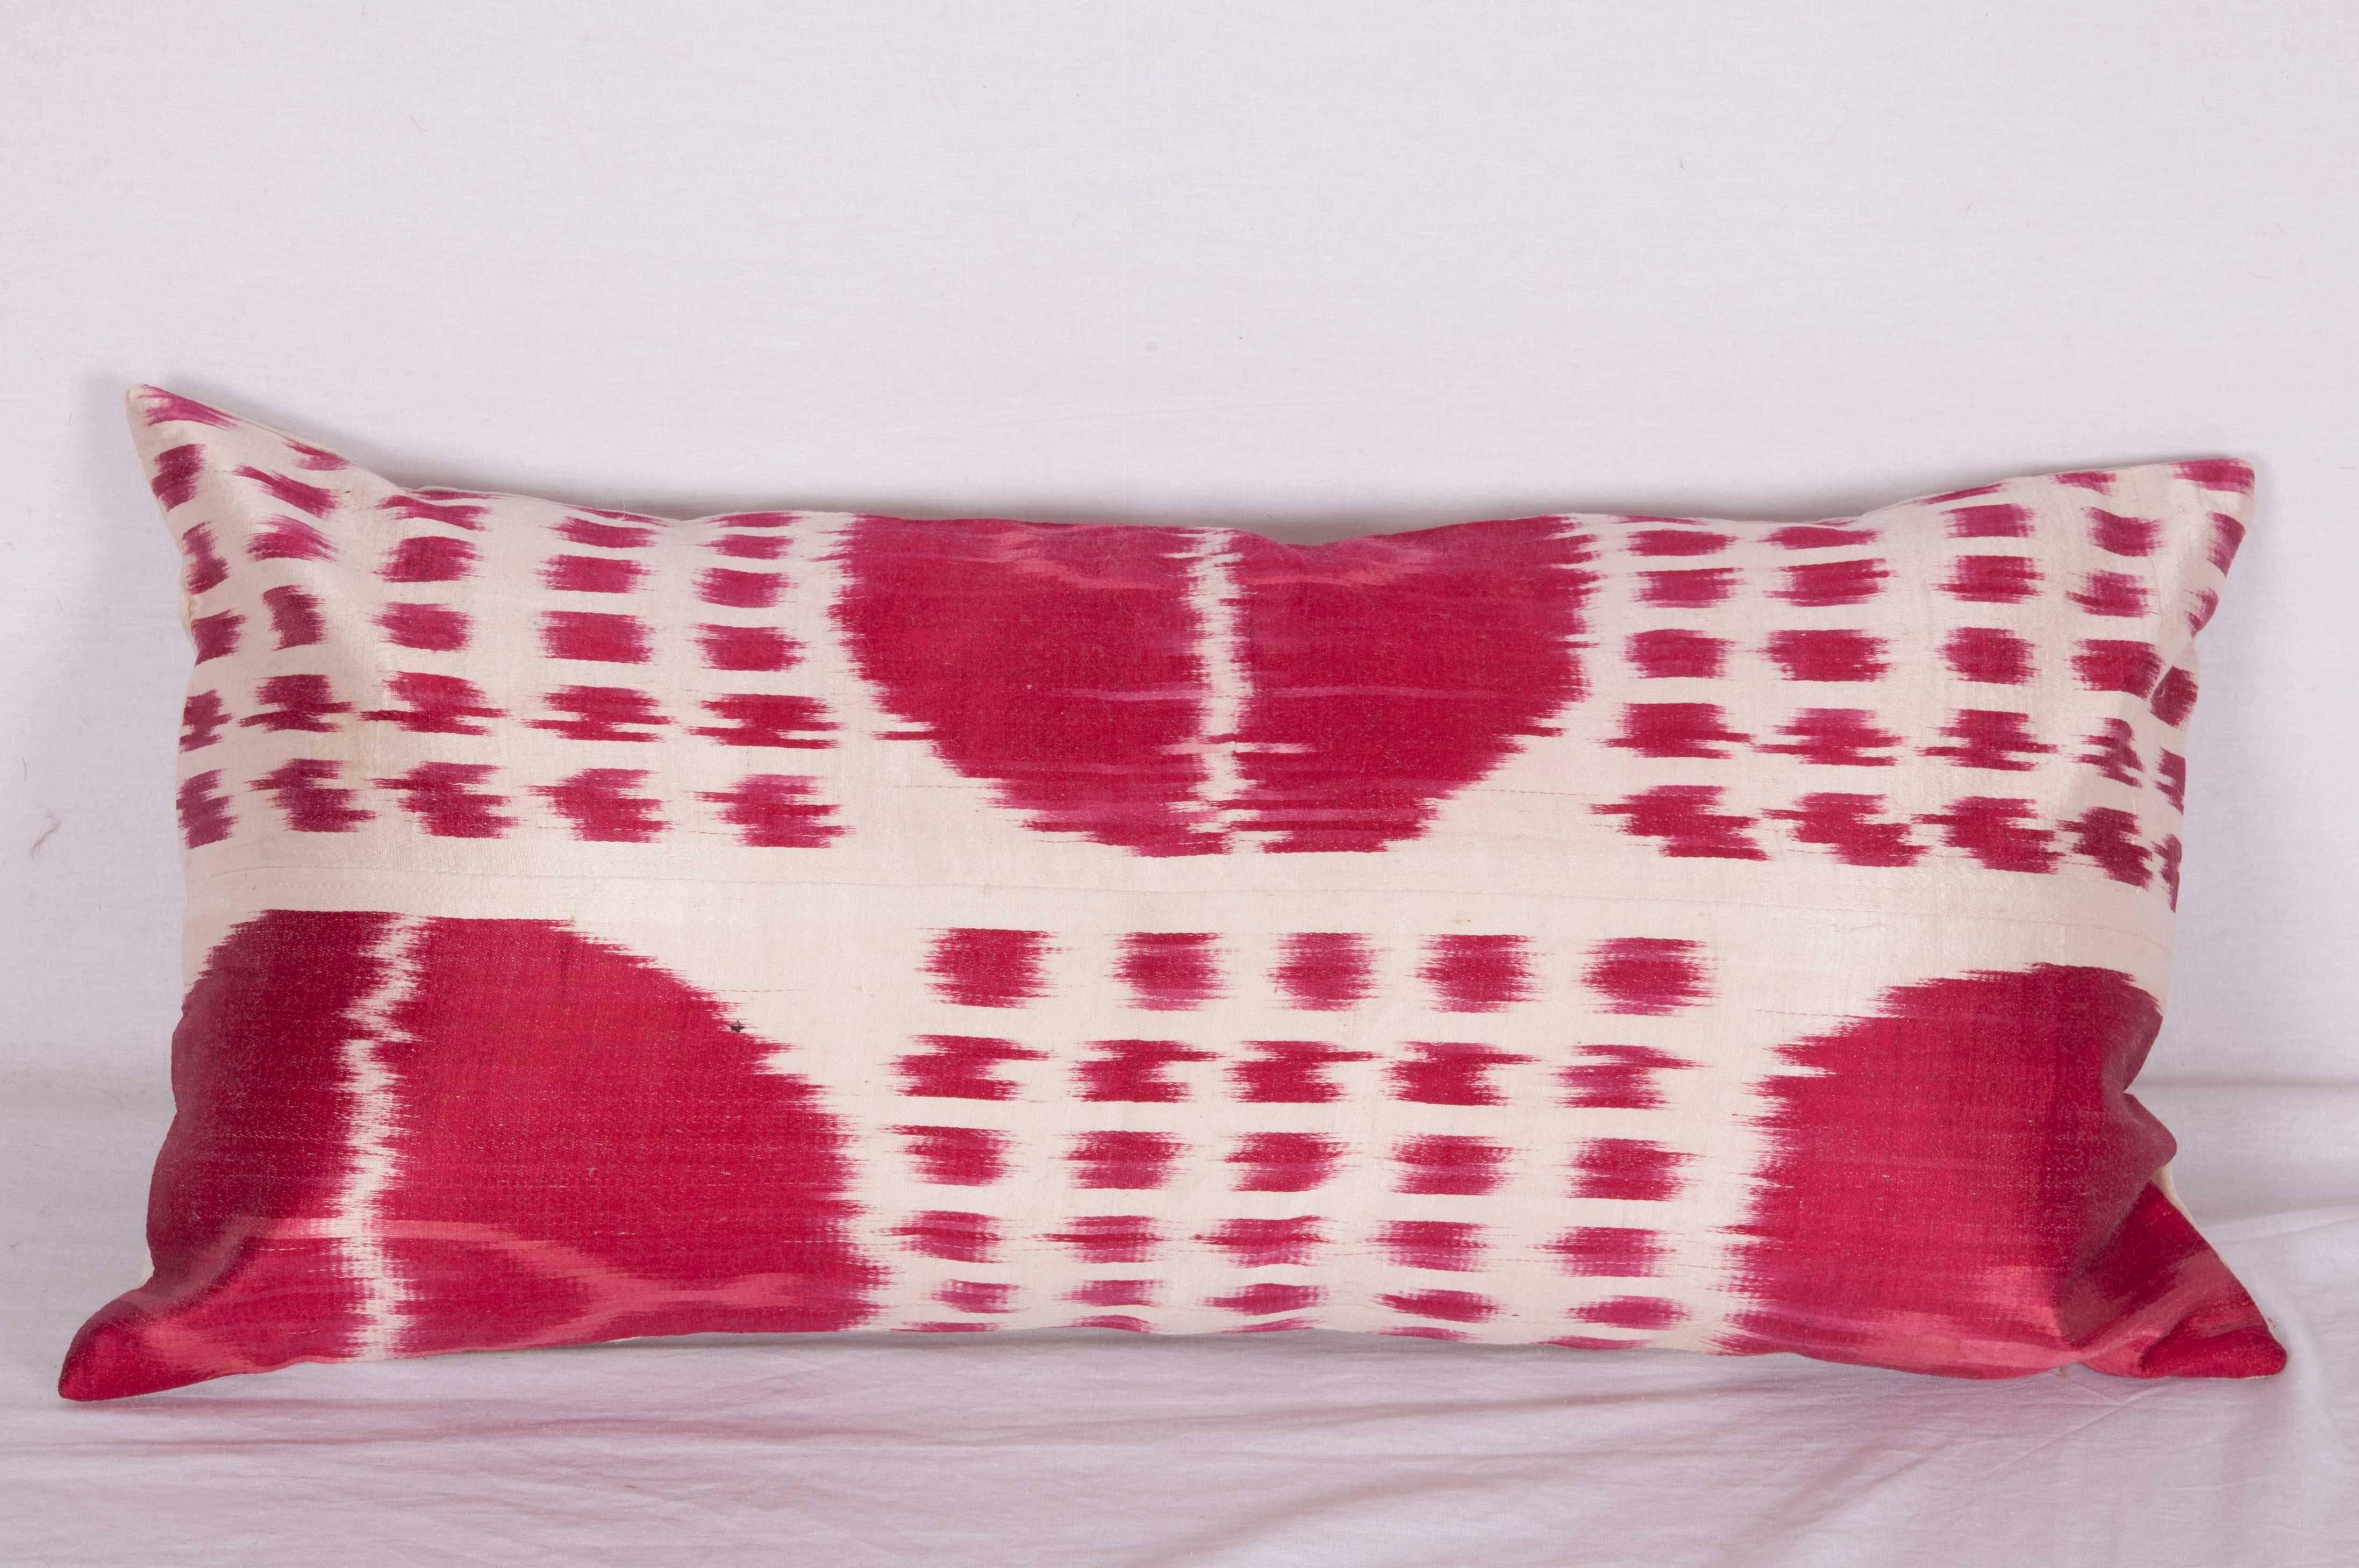 Uzbek Ikat Pillow Cases Fashioned from a Late 19th Century Fragment of a Tajik Ikat